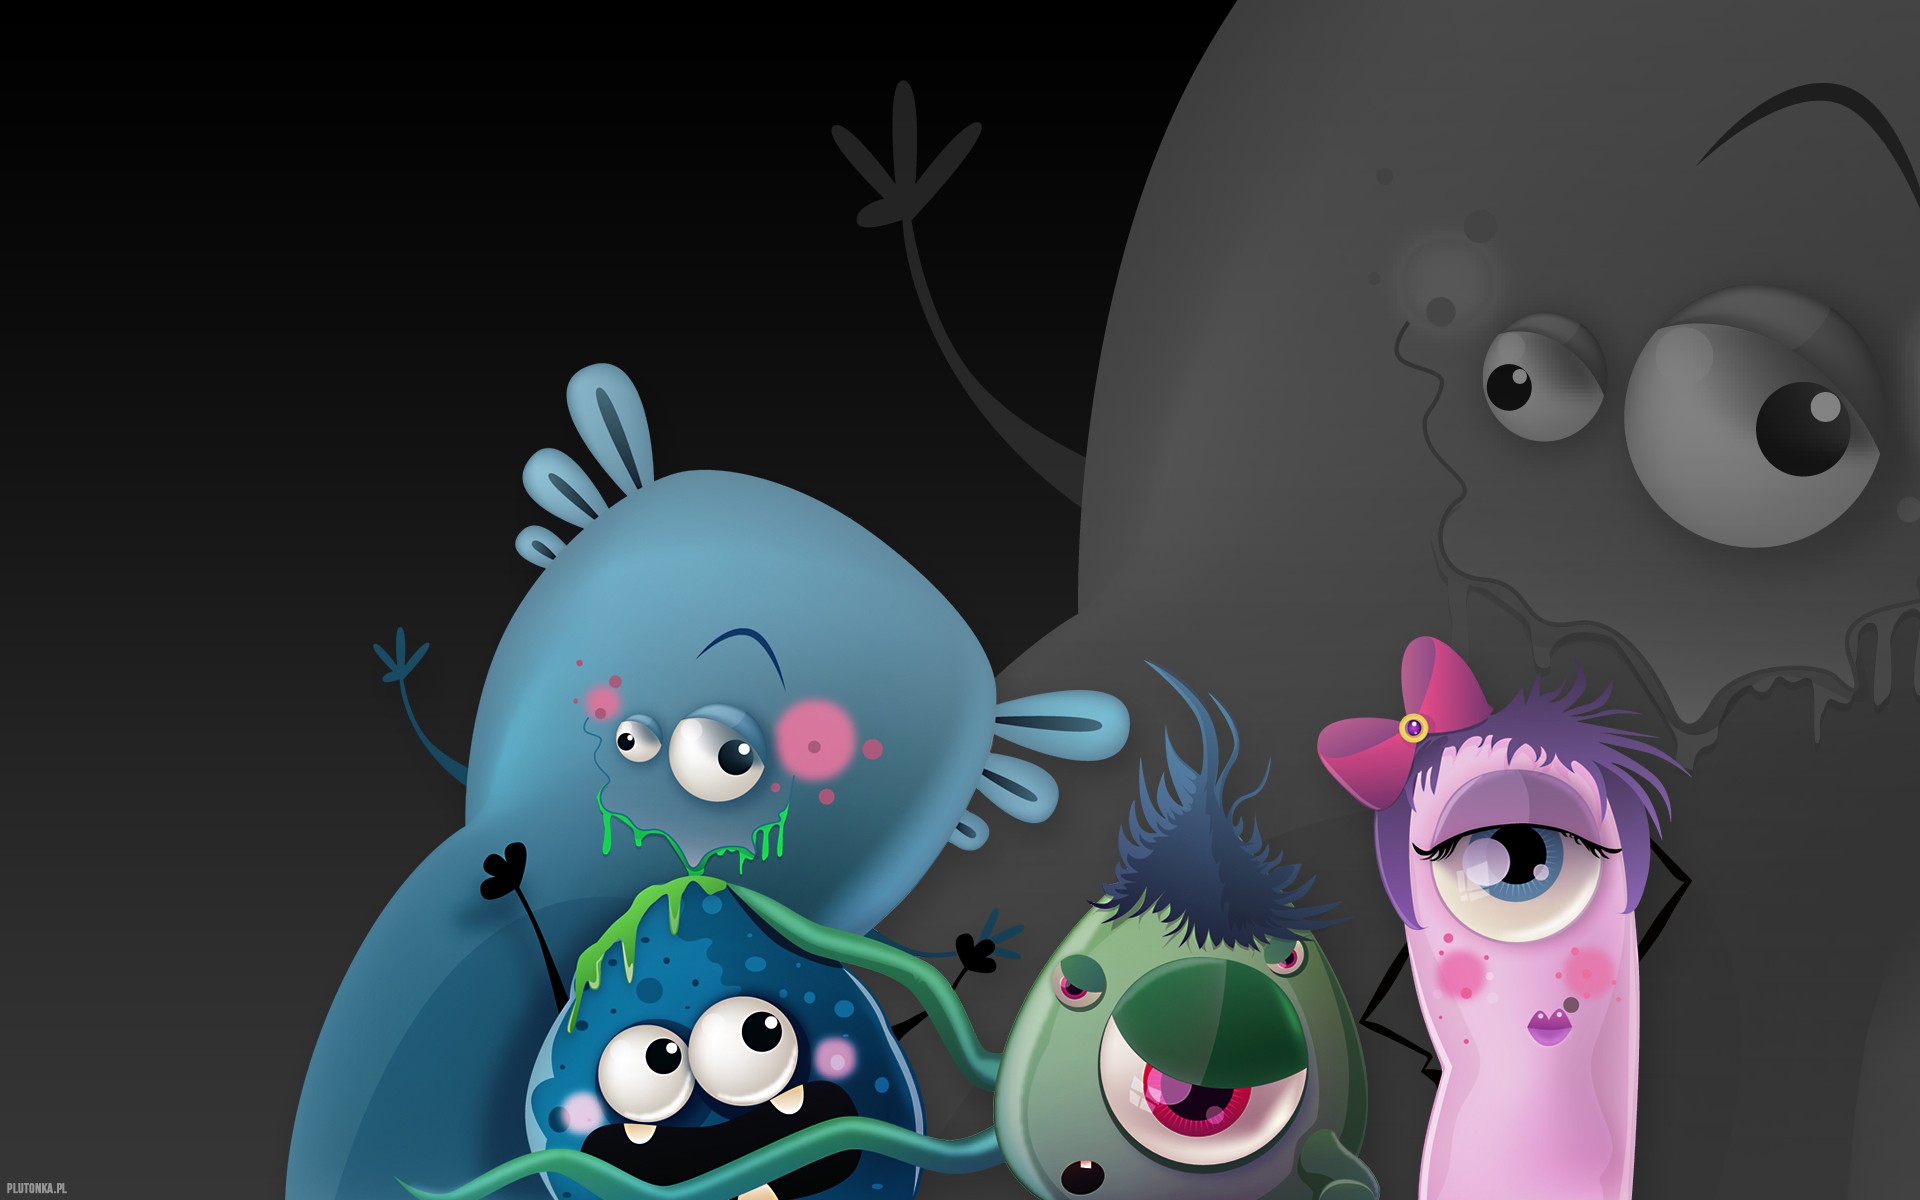 The Cute Monsters Wallpaper iPhone